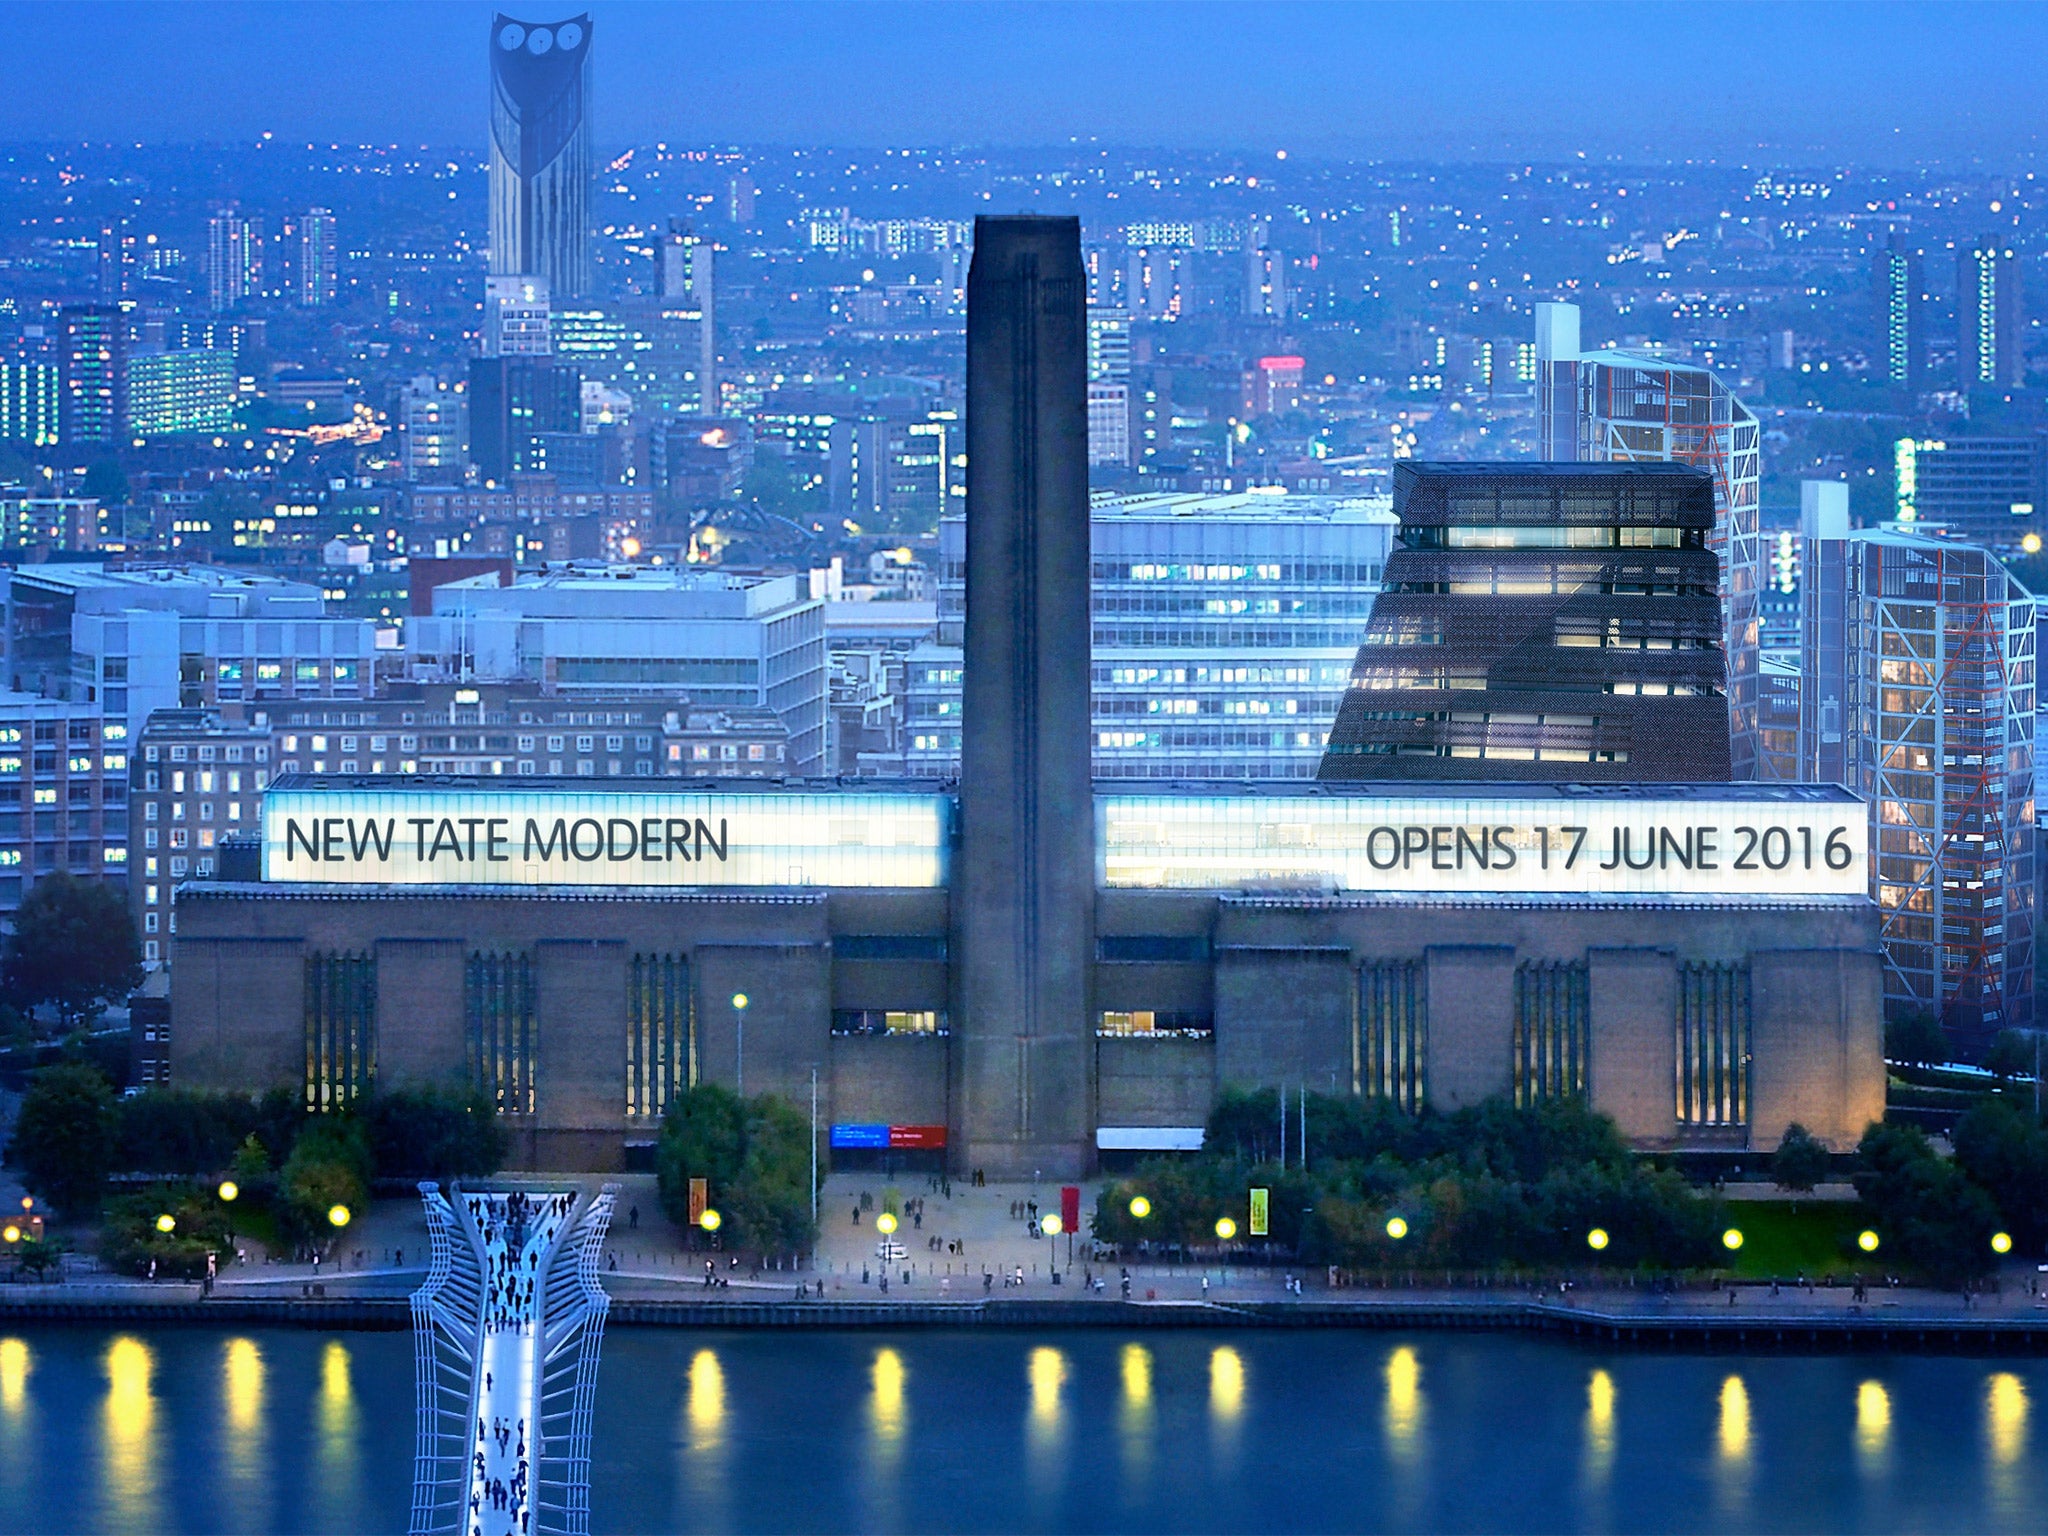 Tate Modern will open the new 10-storey extension on June 17 of next year